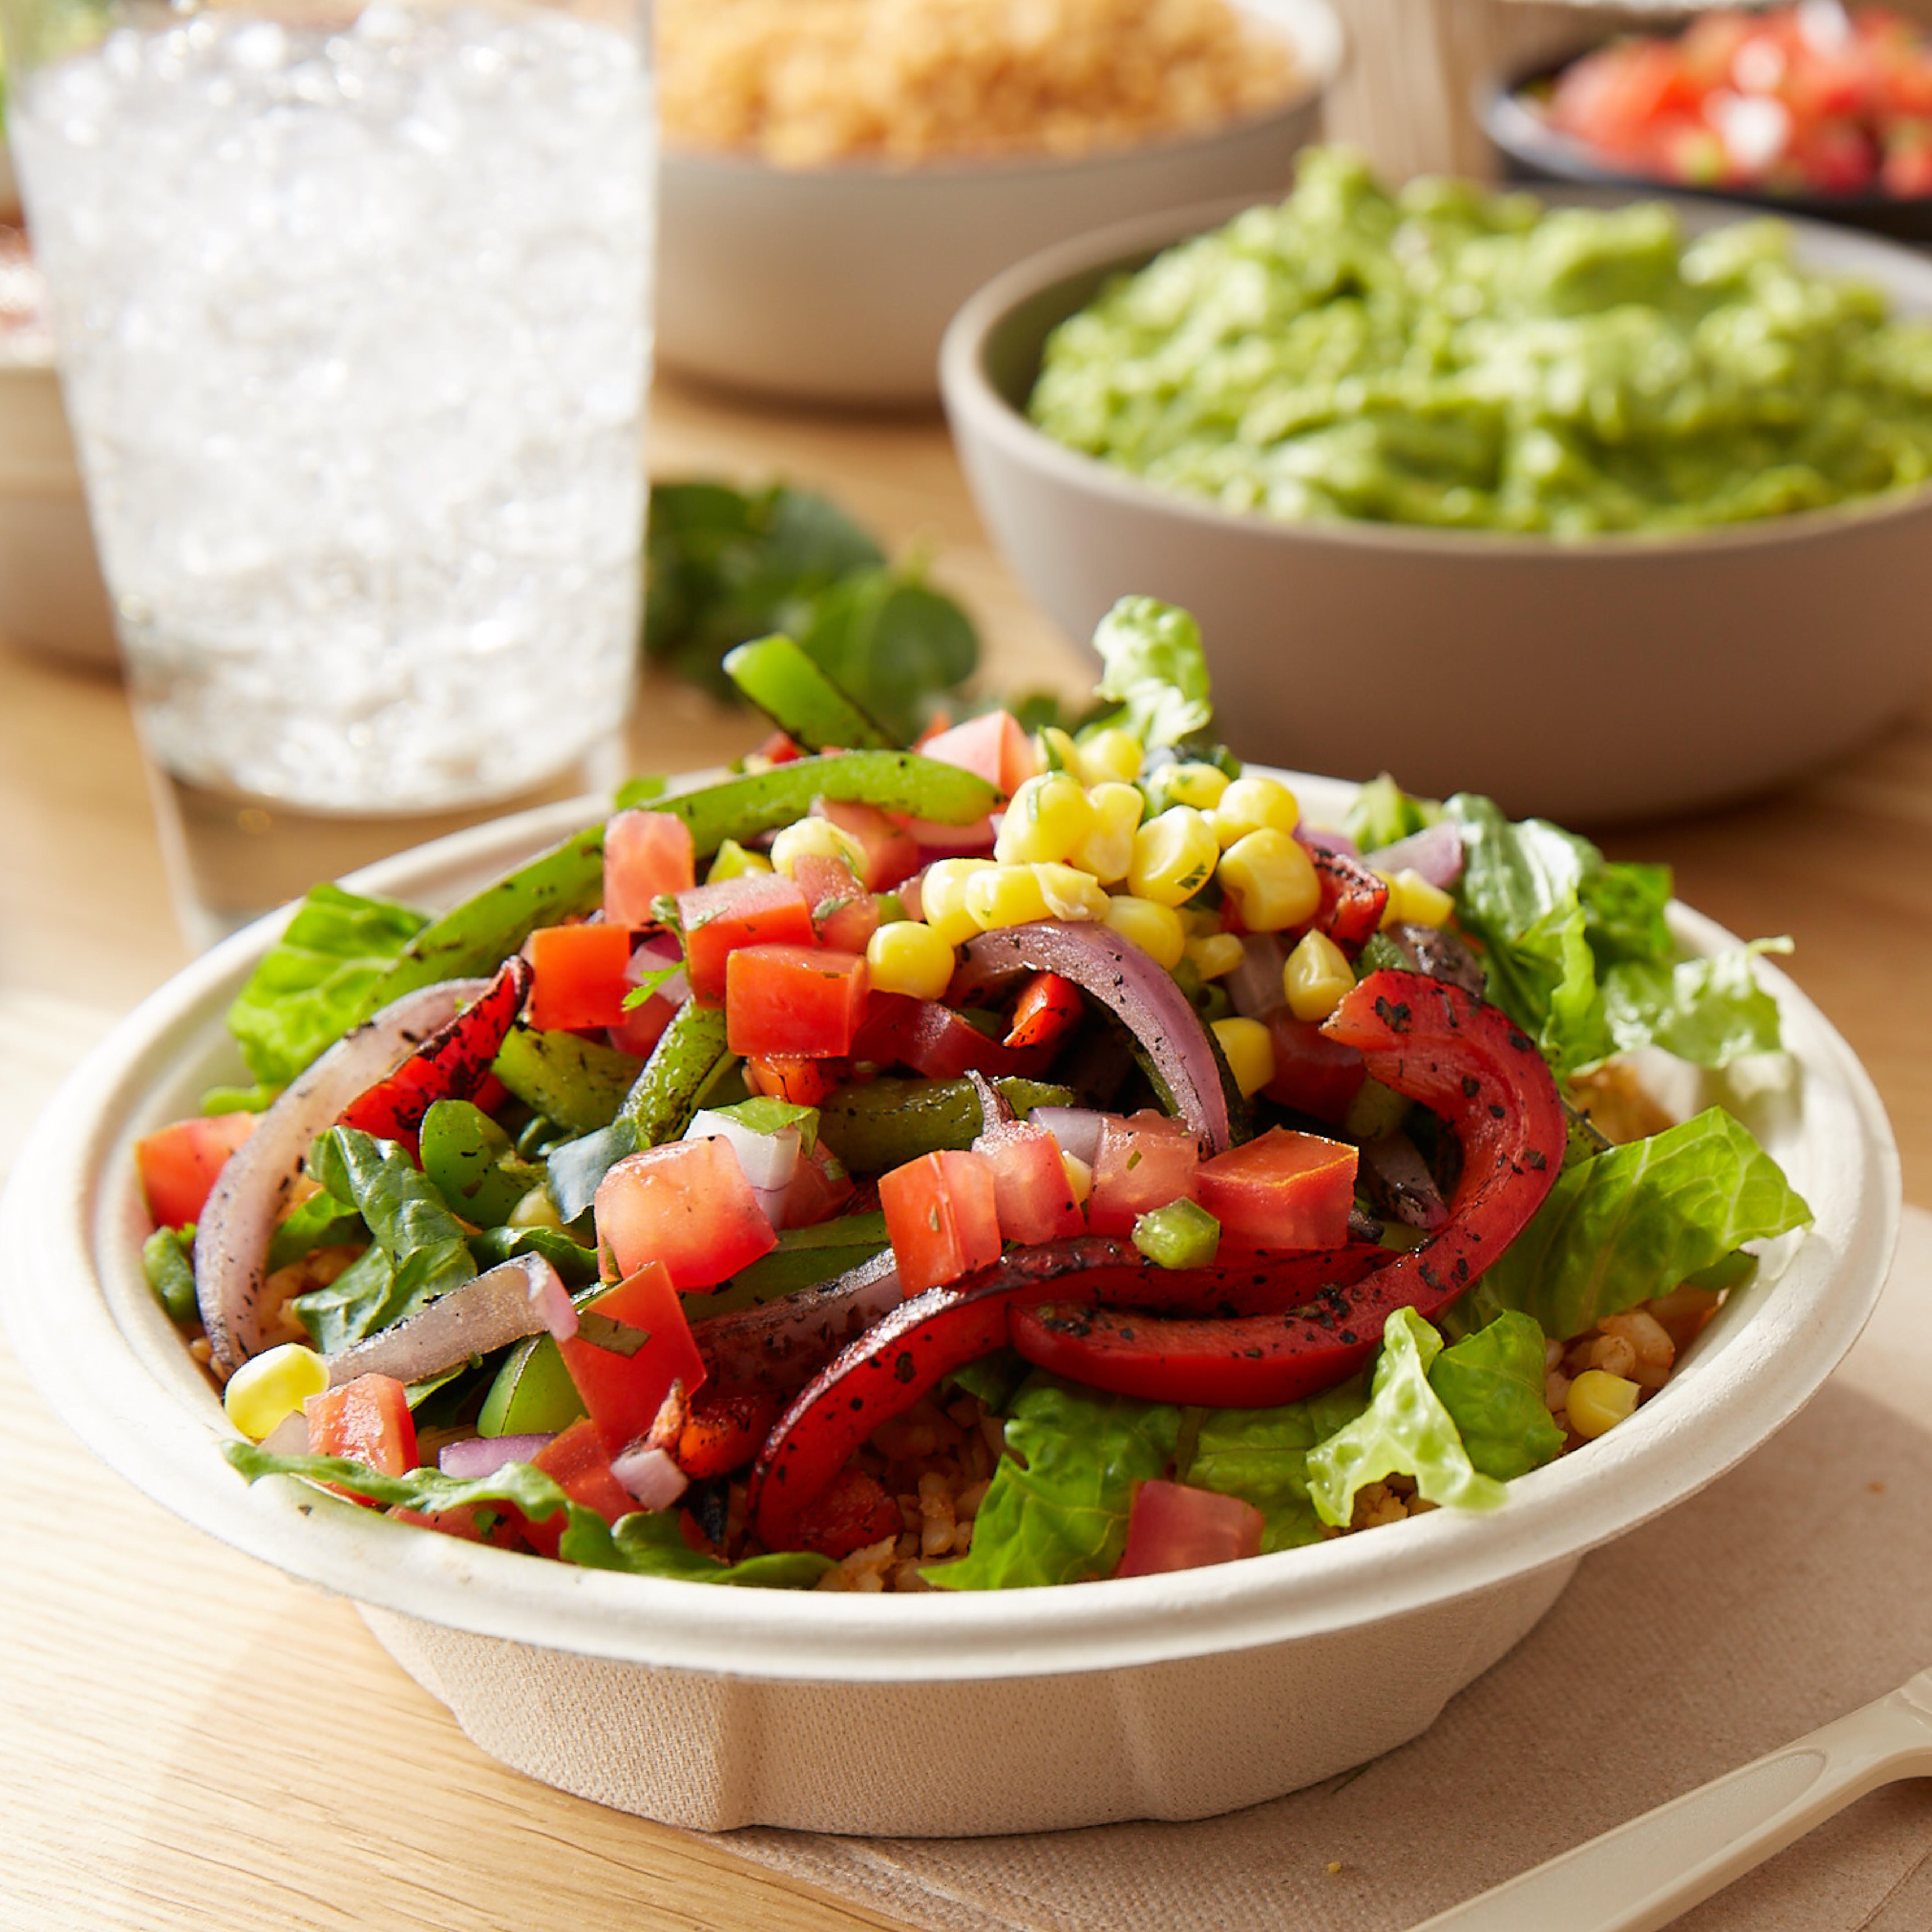 Salads are made with crisp romaine and can be topped with fresh ingredients like flame-grilled fajita vegetables, freshly-made pico de gallo and chile corn salsa and a protein of your choice.